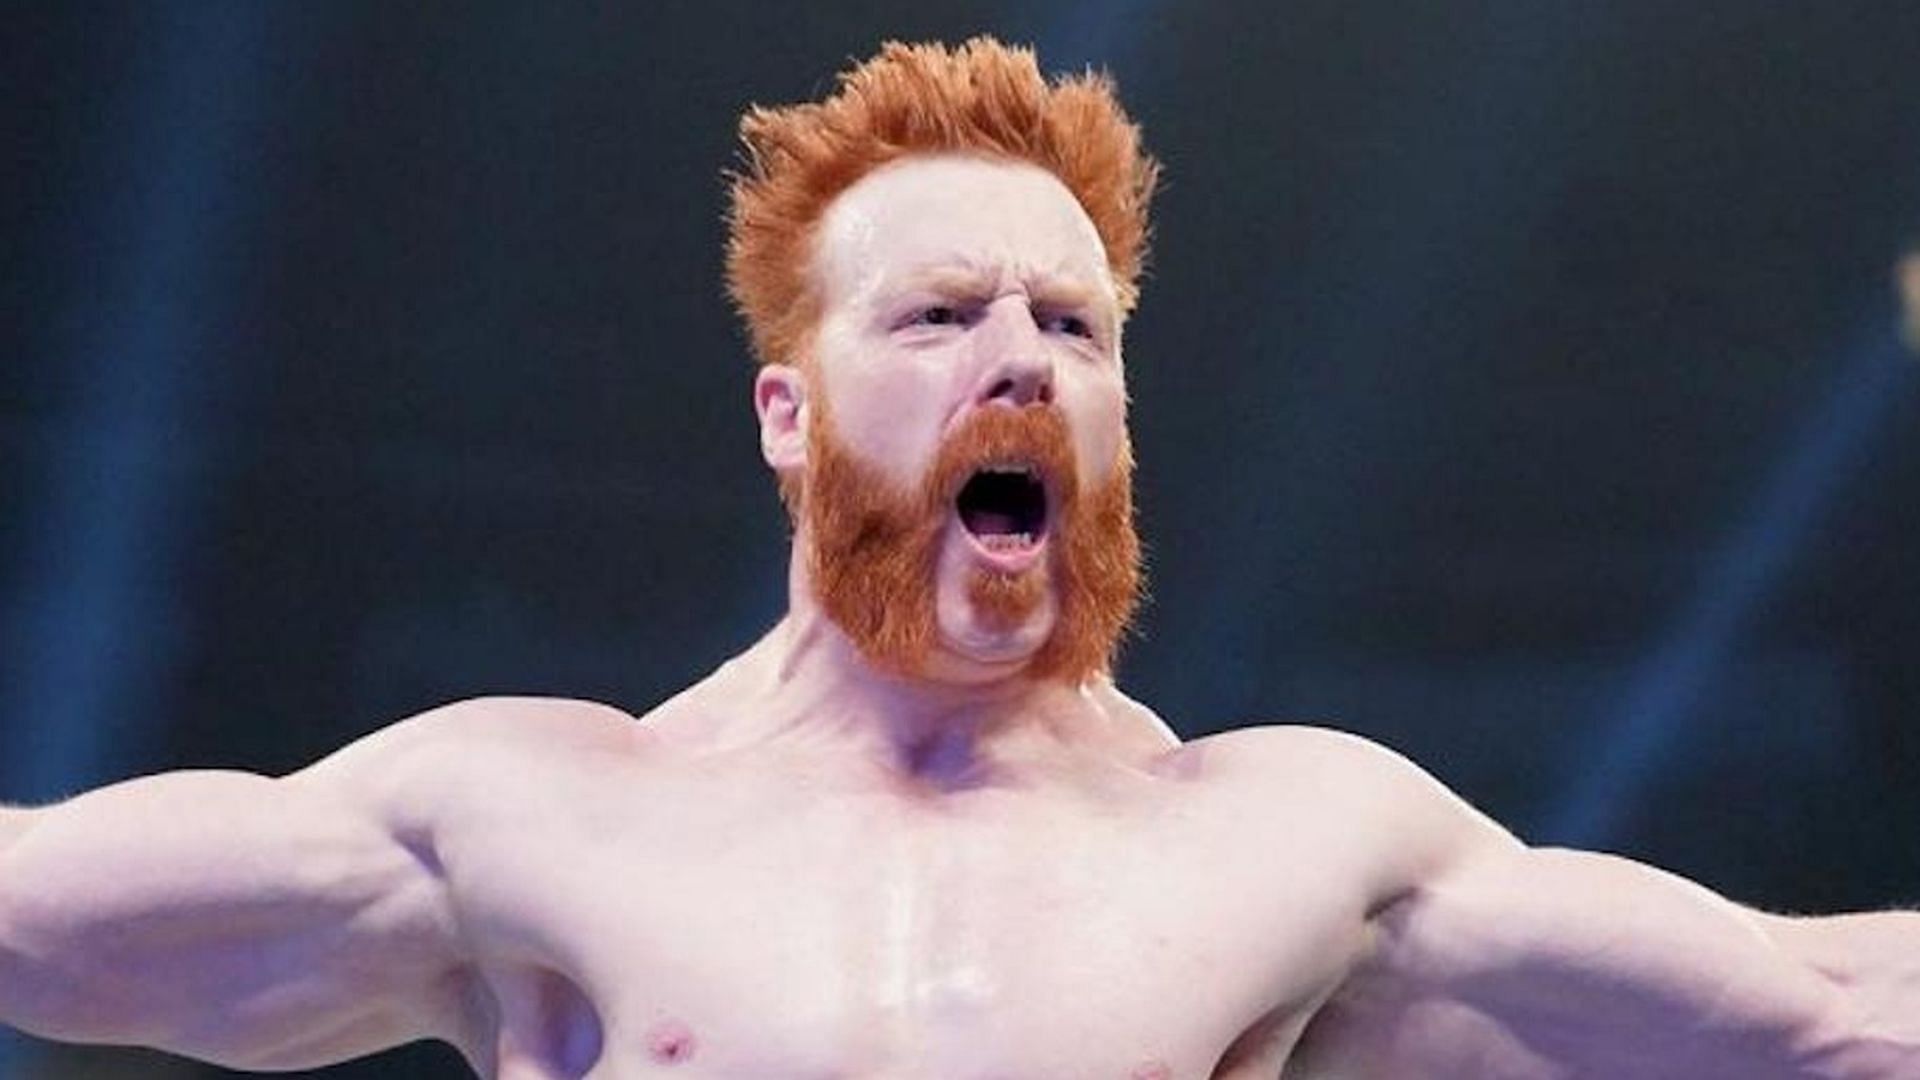 Who should be the final opponent for Sheamus?